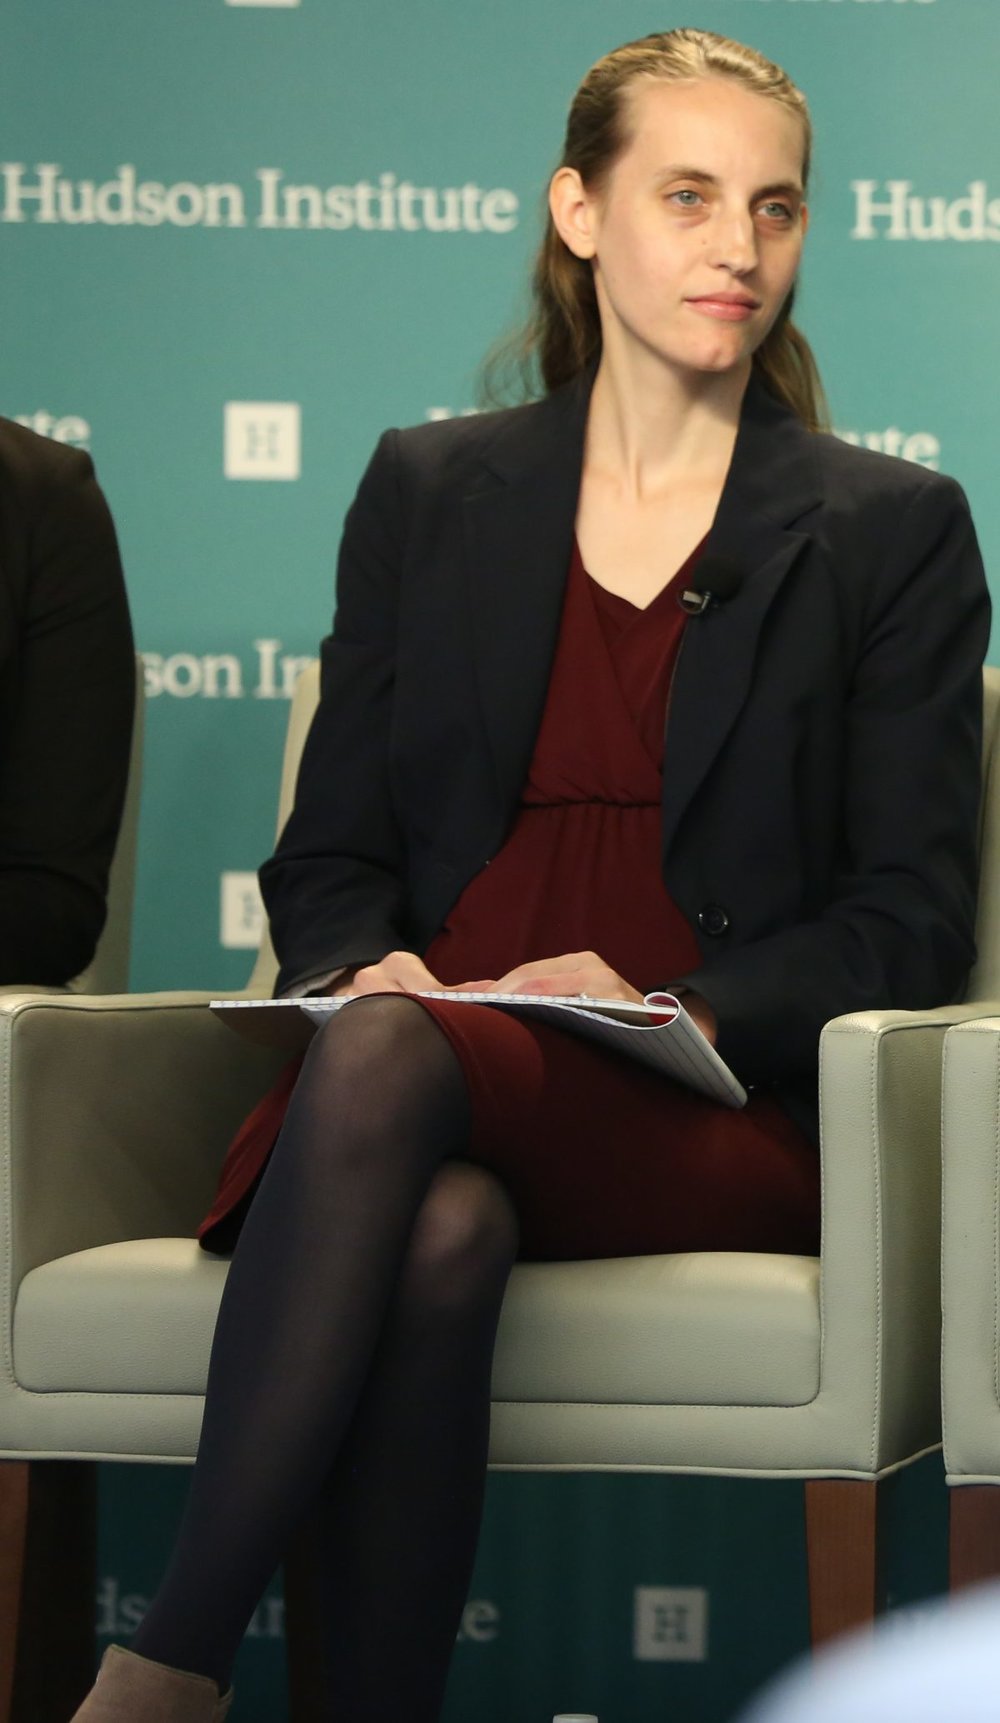  Rachelle Peterson, policy director at the National Association of Scholars, speaking at the “Mark Palmer Forum: China’s Global Challenge to Democratic Freedom” at the Hudson Institute in Washington on Oct. 27, 2018. (York Du/NTD) 